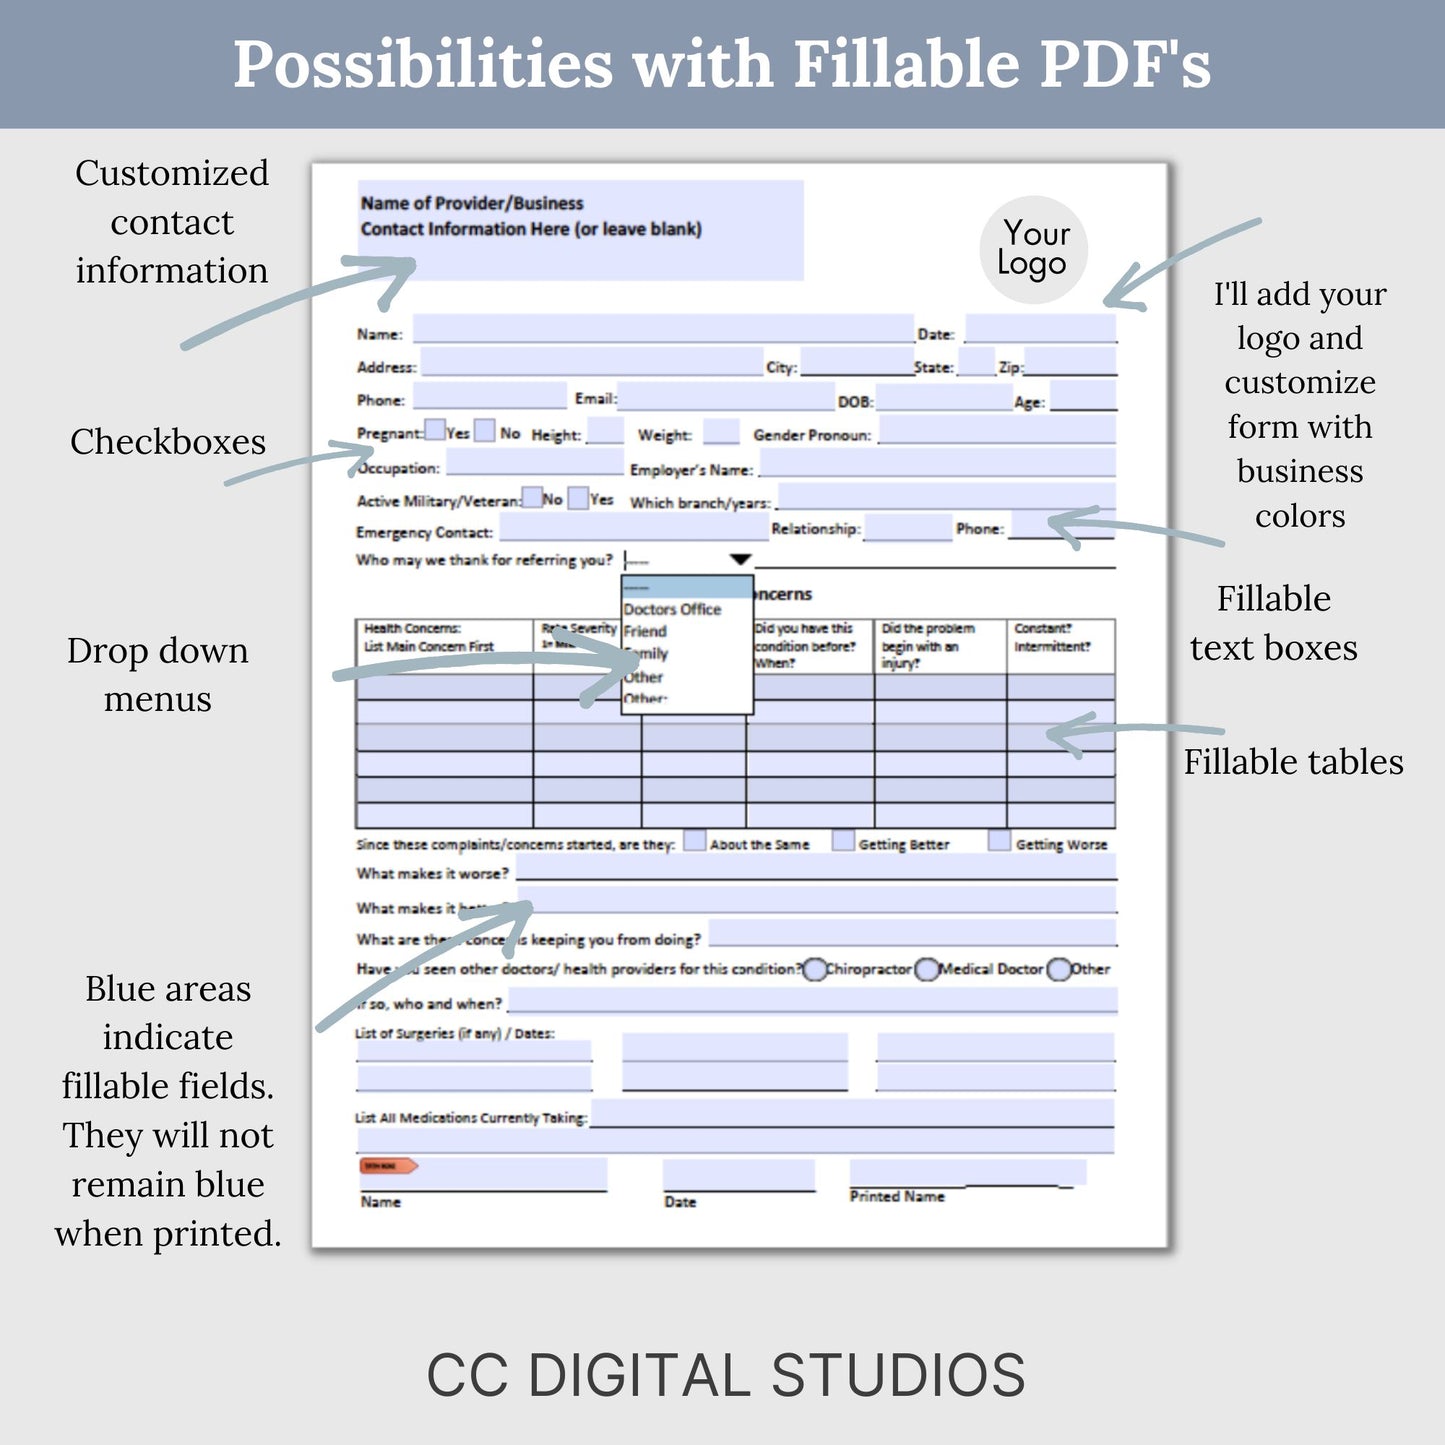 Standard PDF Design Package. Elevate your documents with professional design, edits, and revisions for up to 5 pages. Streamline your paperwork with fillable PDFs